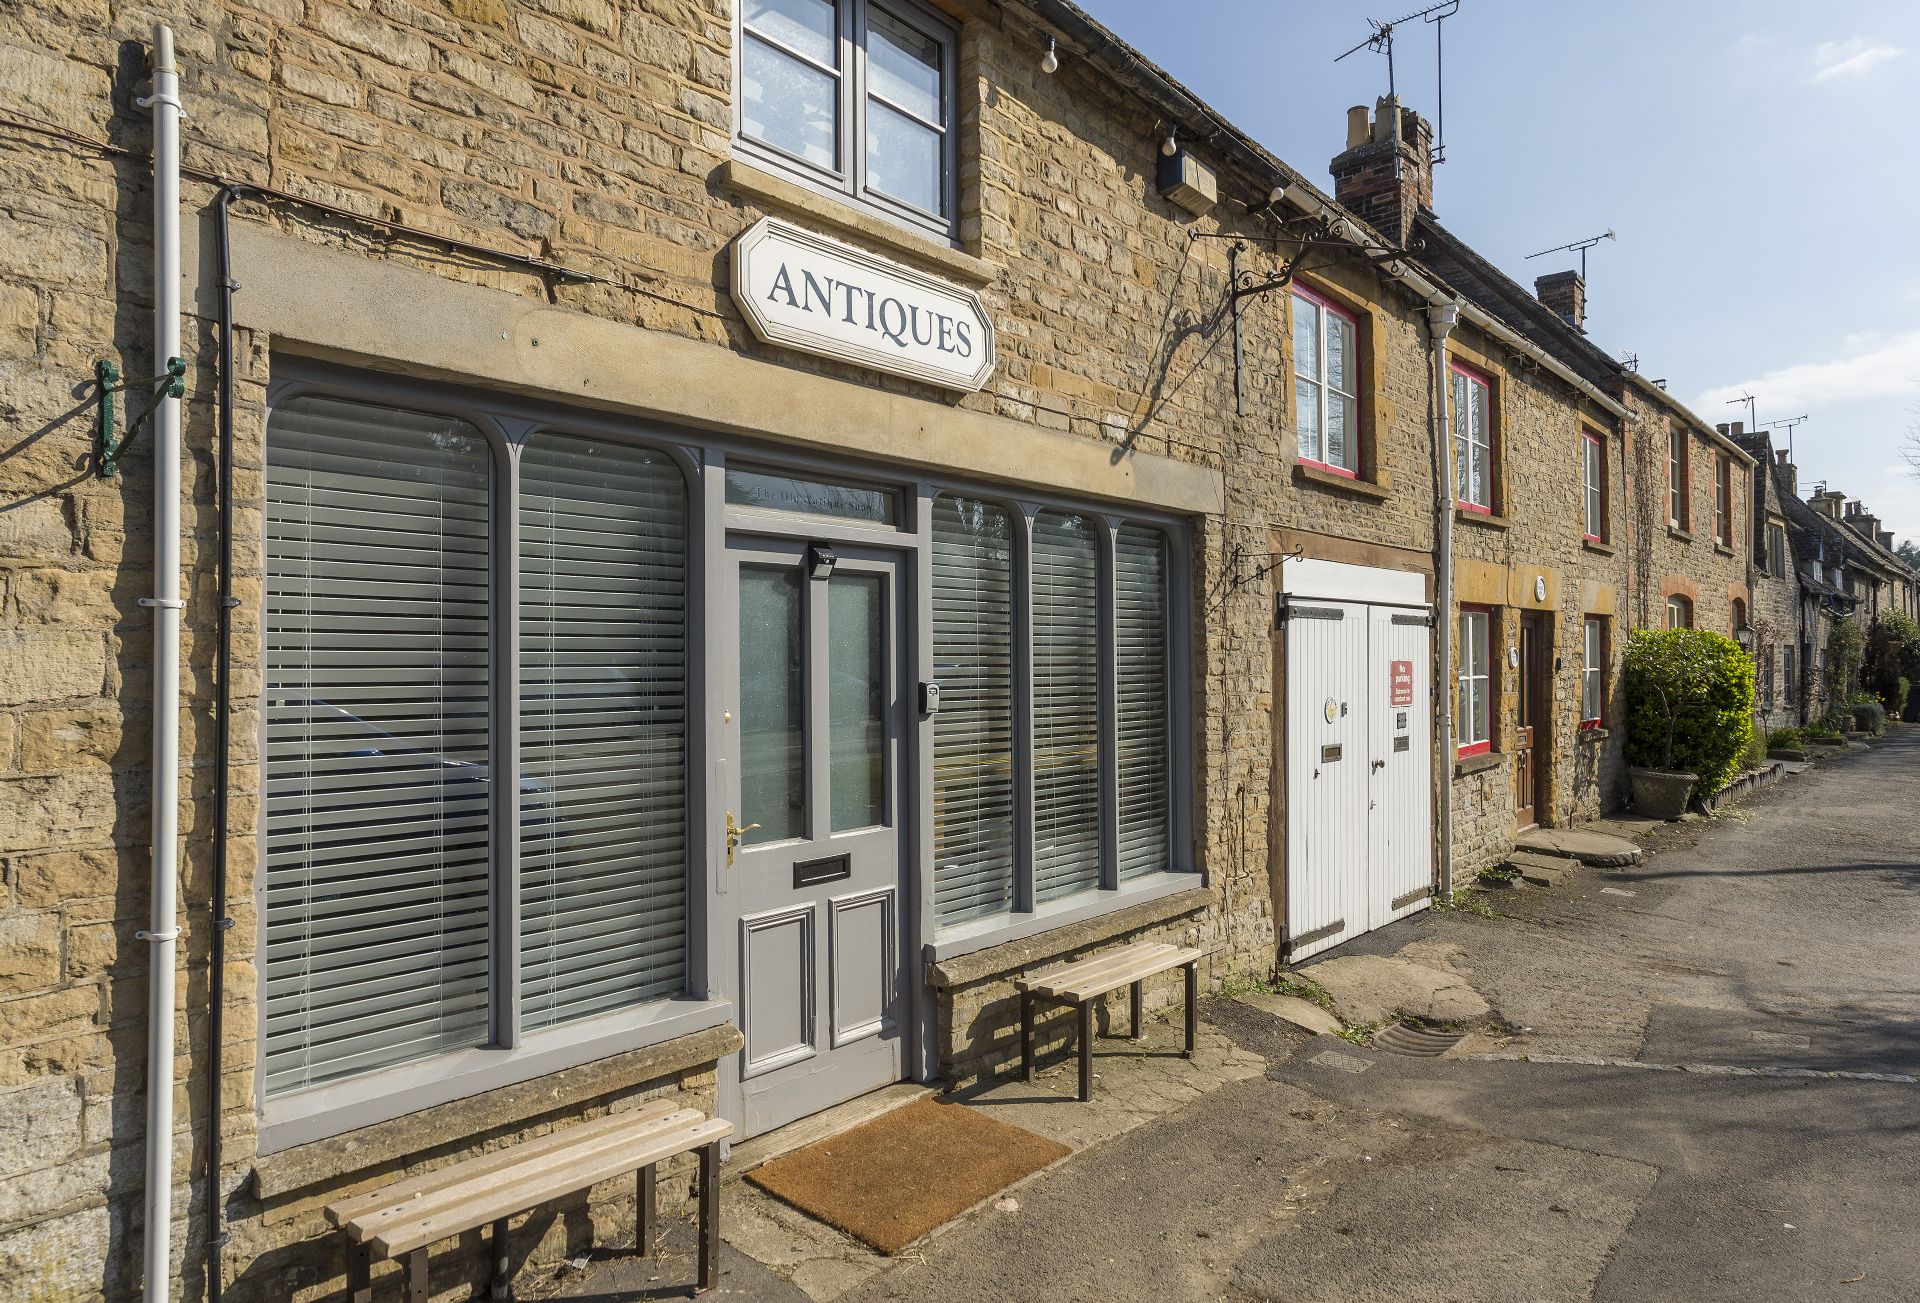 The Old Antique Shop is located in Stow-on-the-Wold